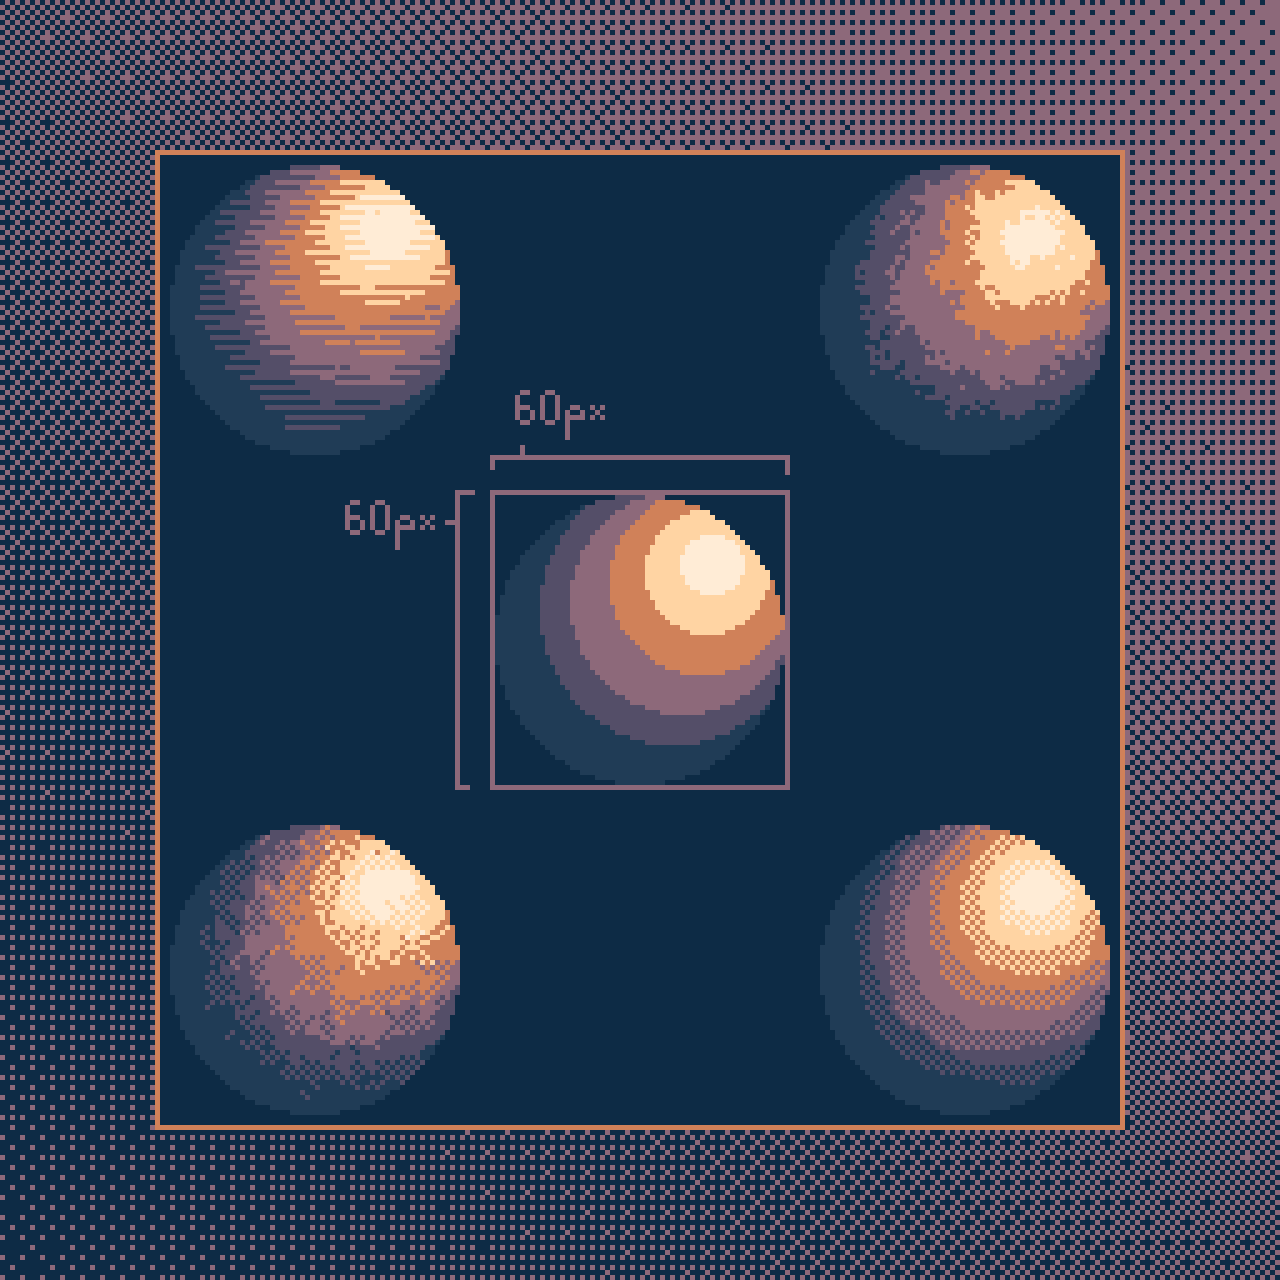 Sphere dithering